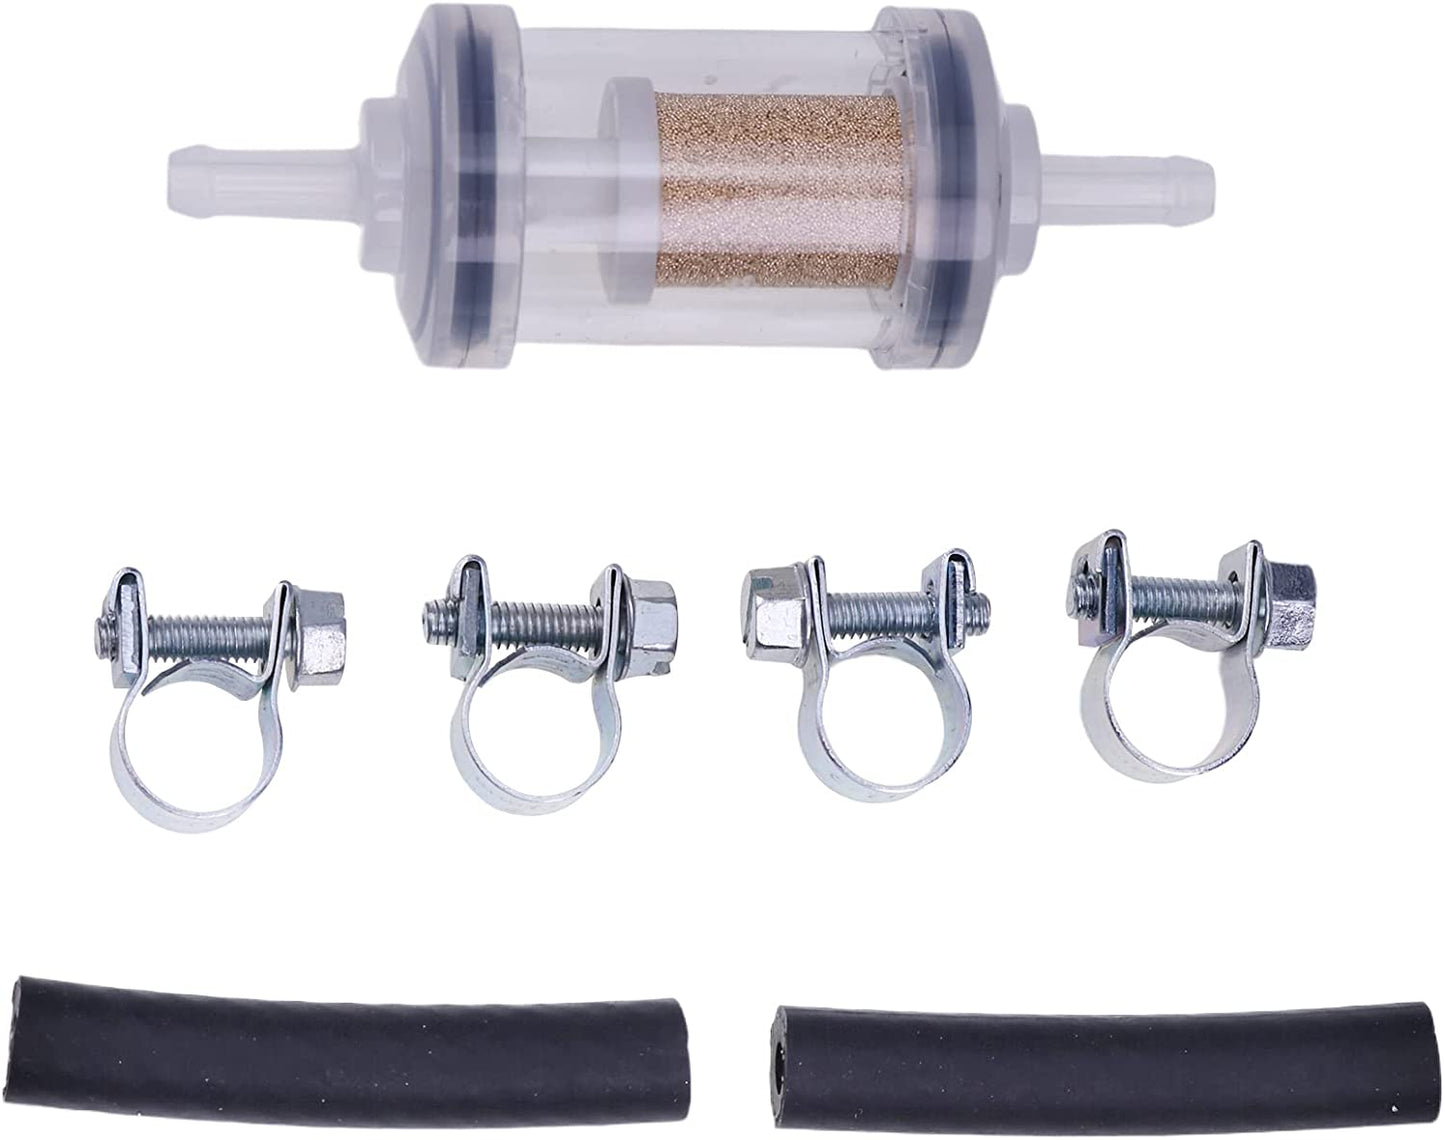 New Diesel Fuel Filter Kit with Clamps and Hoses with 297 Micron Bronze Element Compatible with Webasto Eberspacher Parking Heater Fuel System